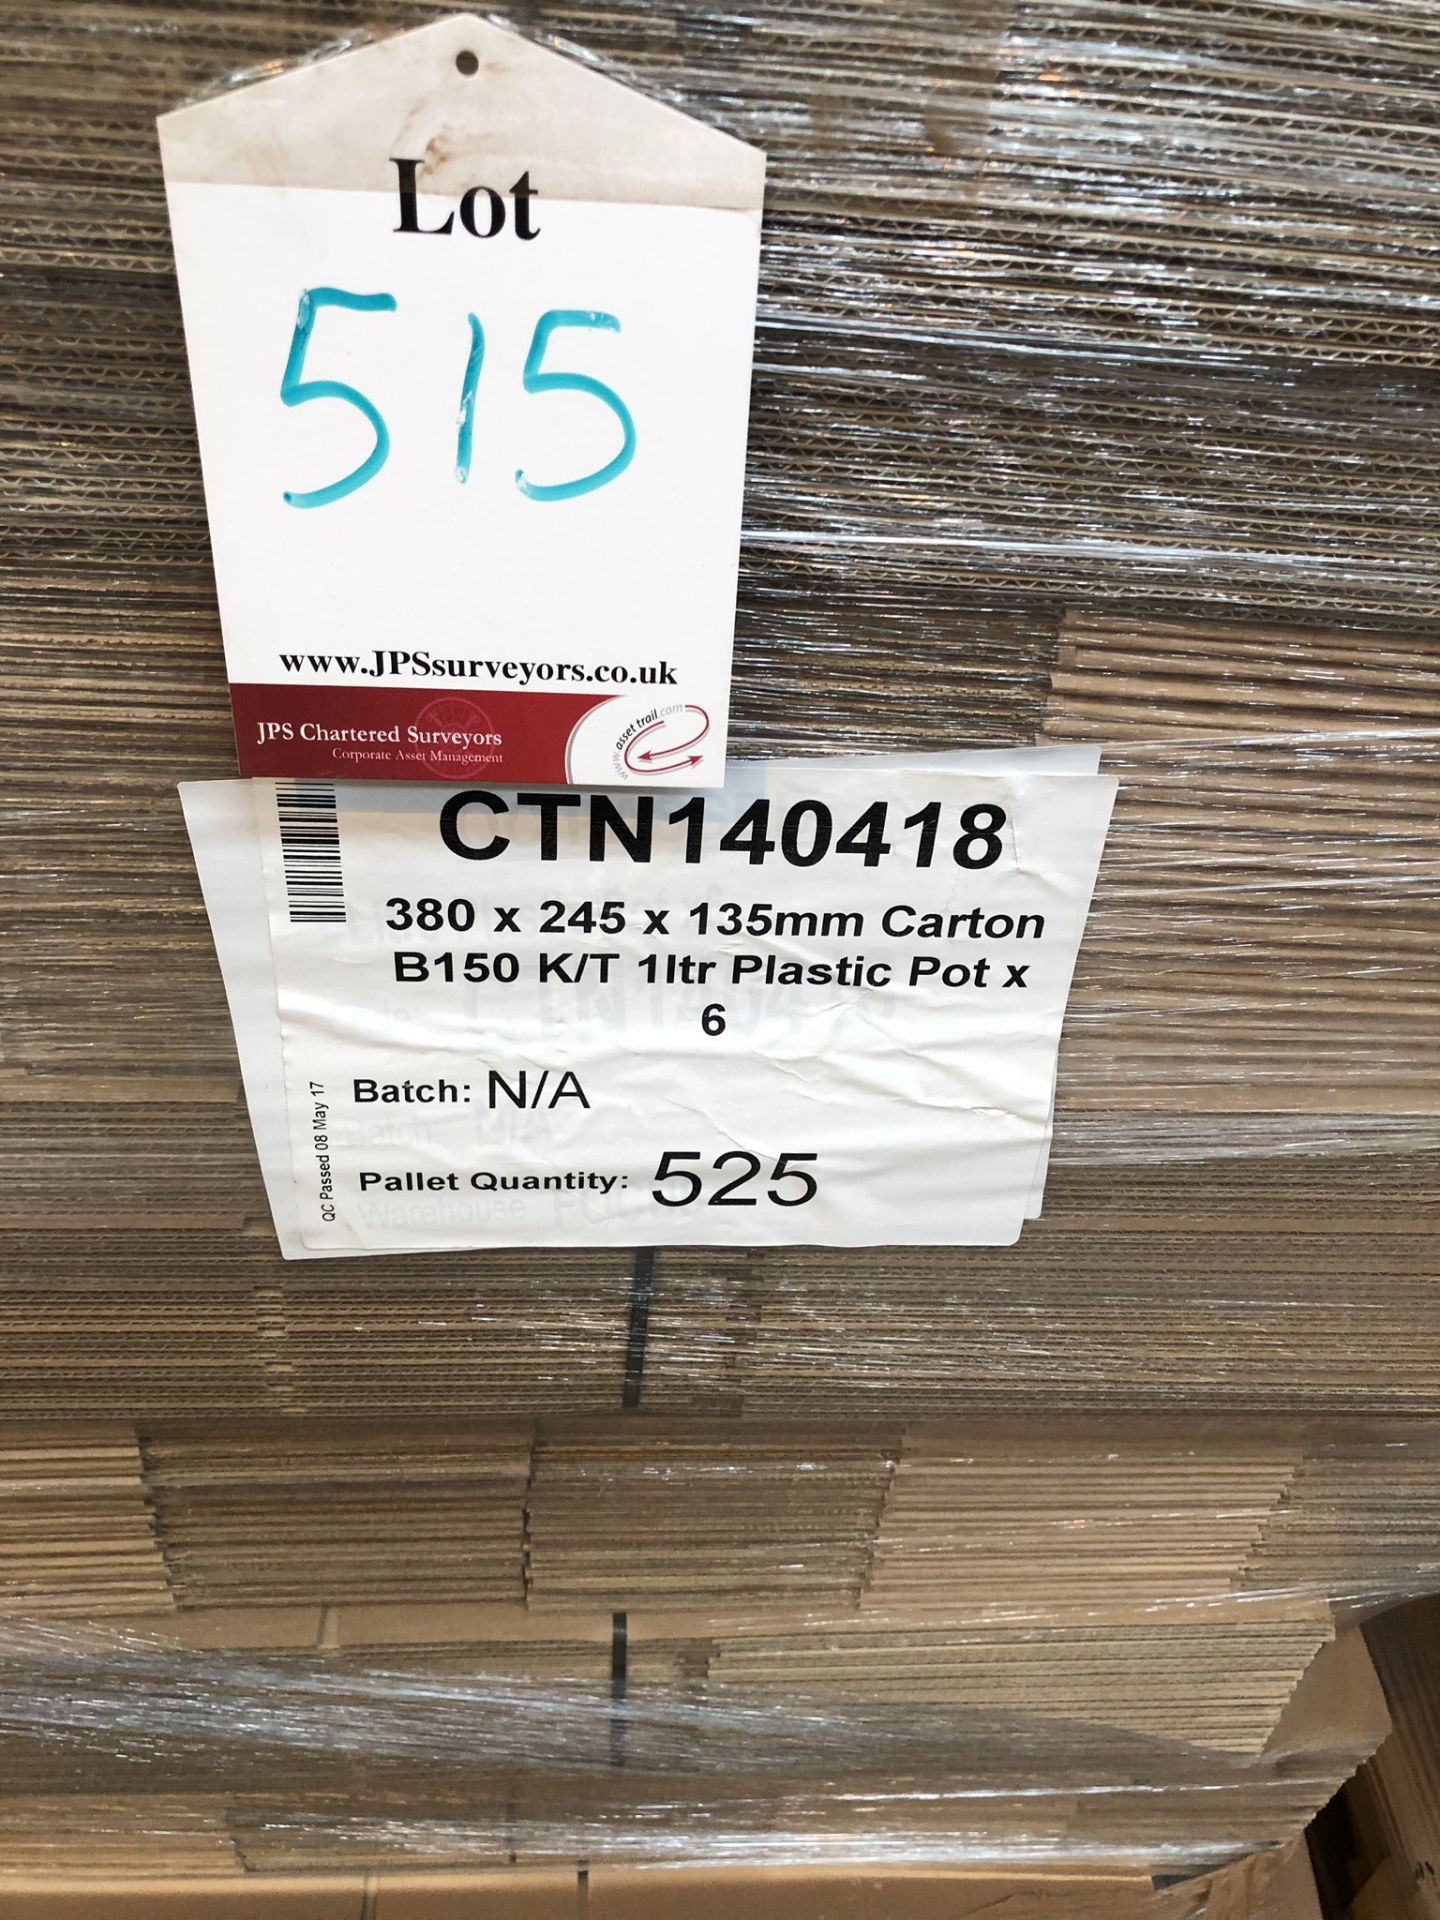 Approximately 525 x Carton B150 K/T Cardboard Boxes | Size: 380 x 245 x 135mm - Image 2 of 2